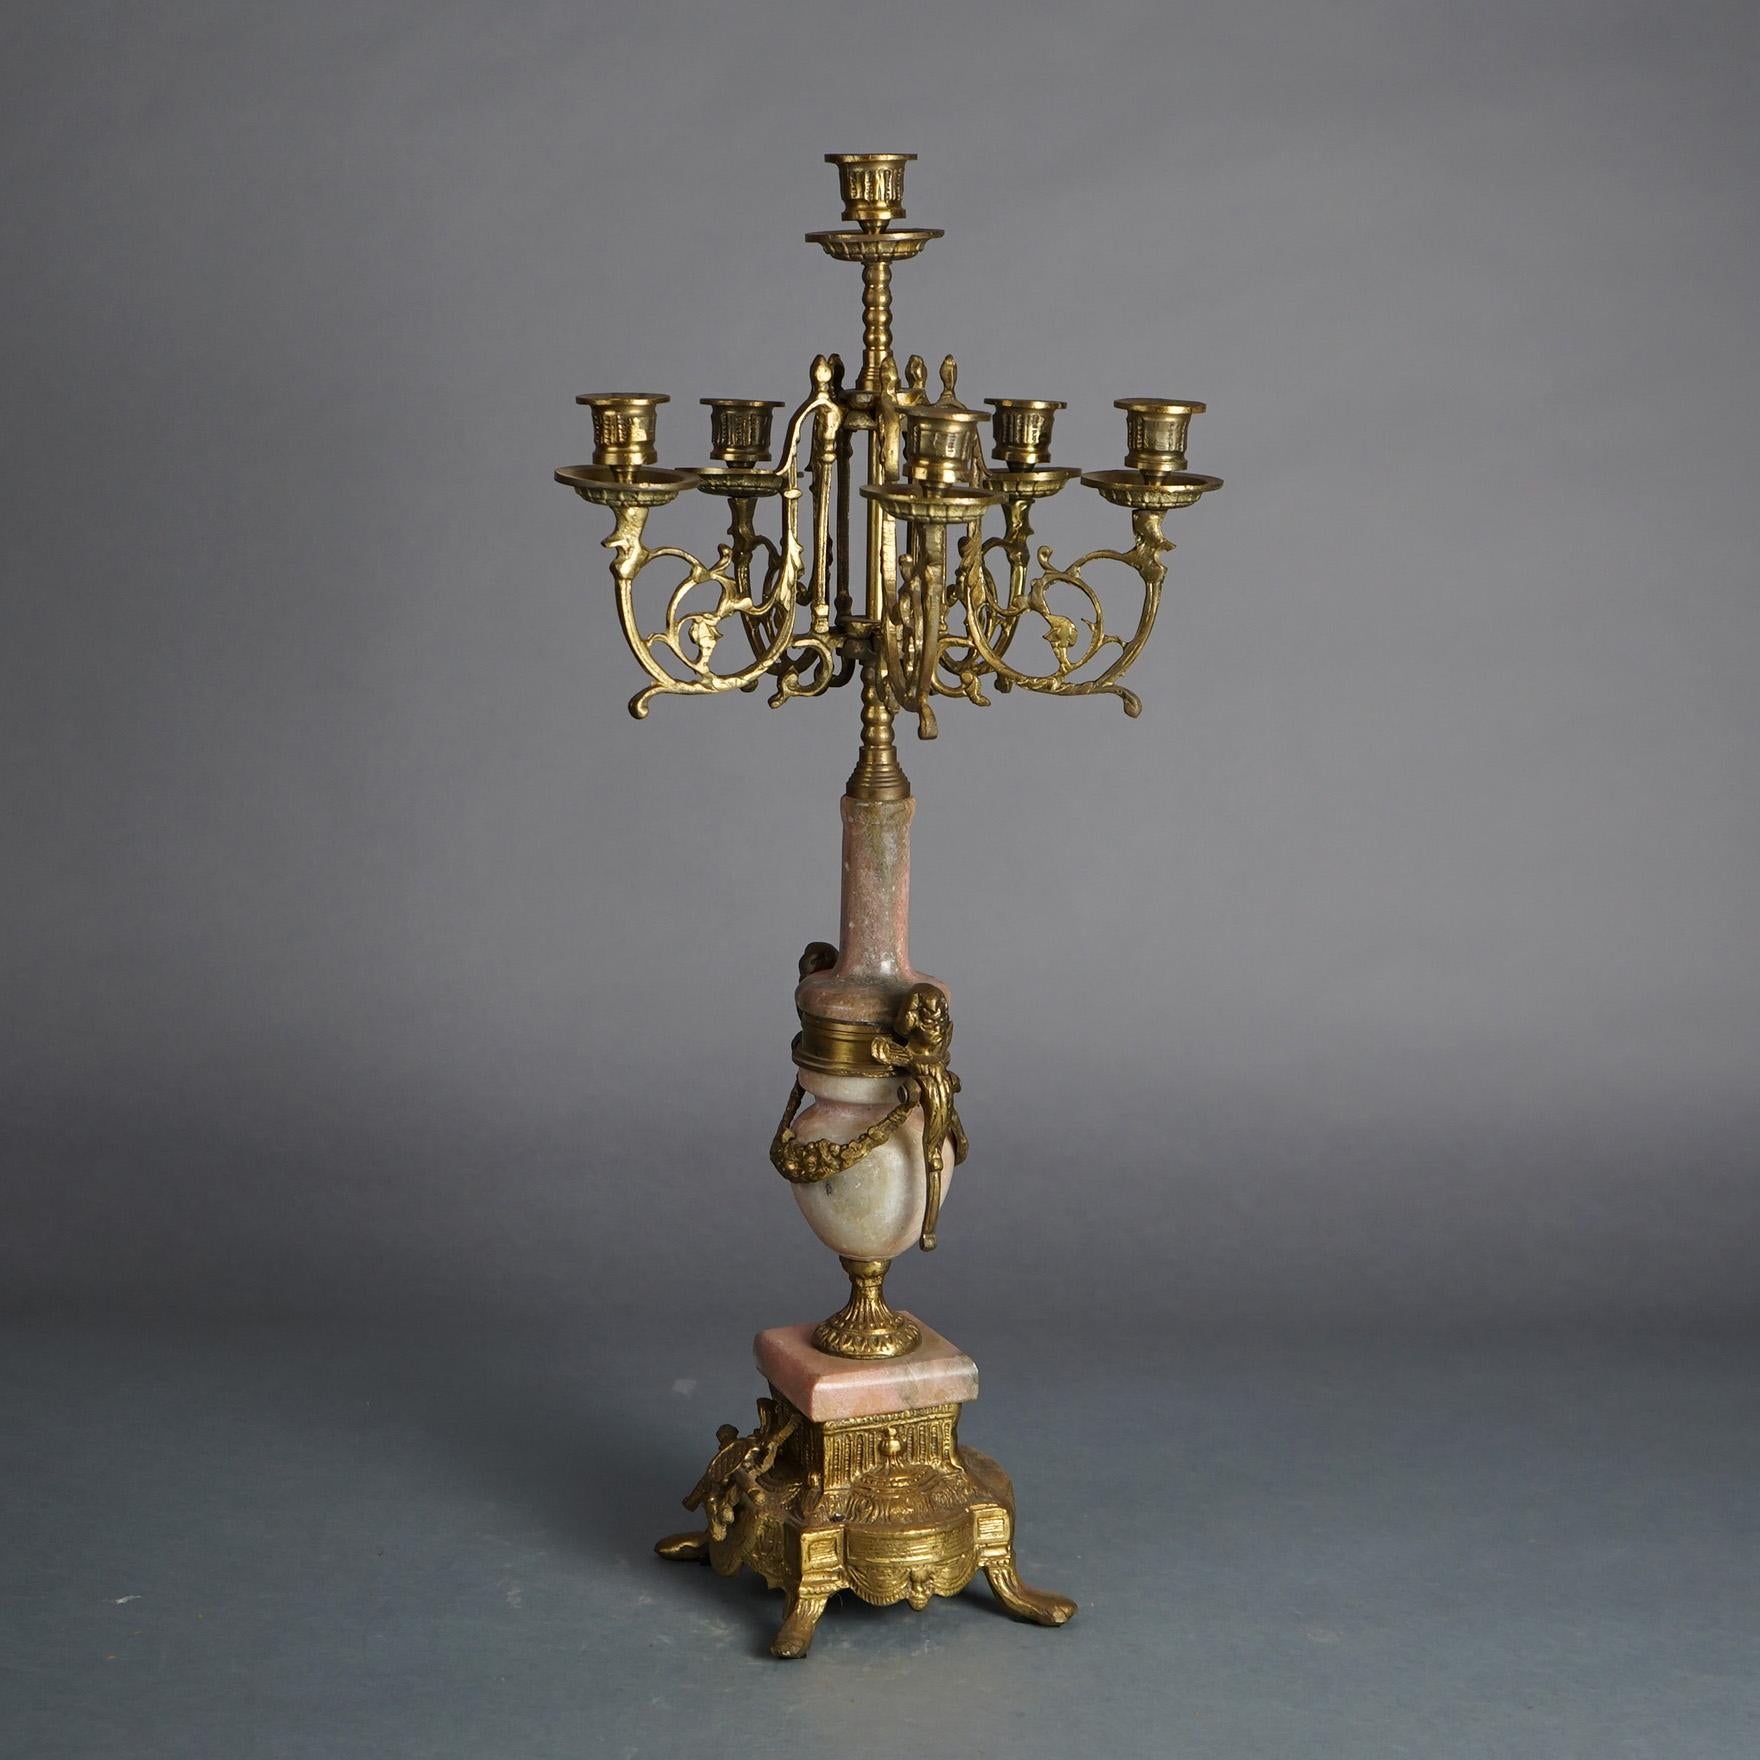 Antique French Louis XVI Style Foliate Cast Bronze & Rouge Marble Six-Light Figural Candelabra with Urn Form Base and Cherubs C1920

Measures- 25''H x 11''W x 11''D